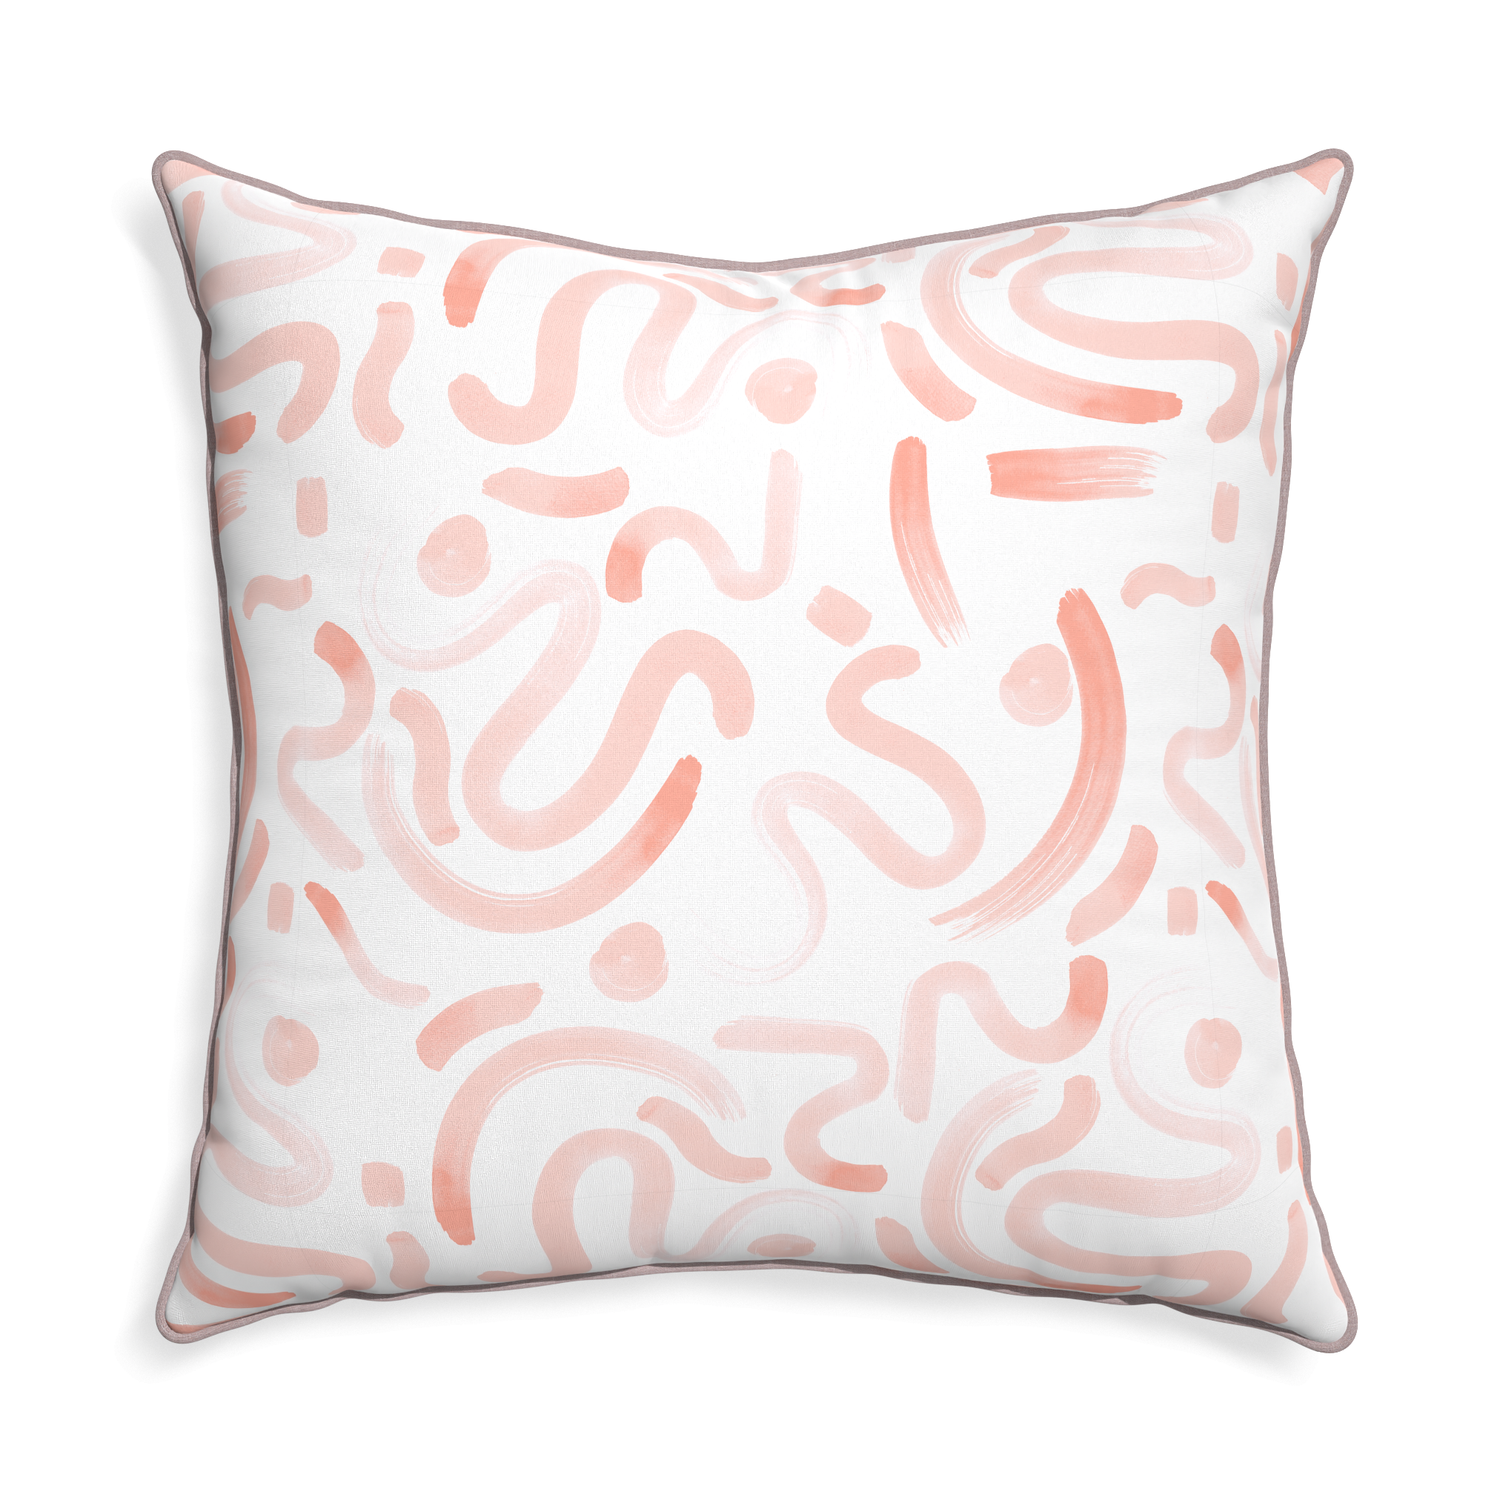 Euro-sham hockney pink custom pink graphicpillow with orchid piping on white background